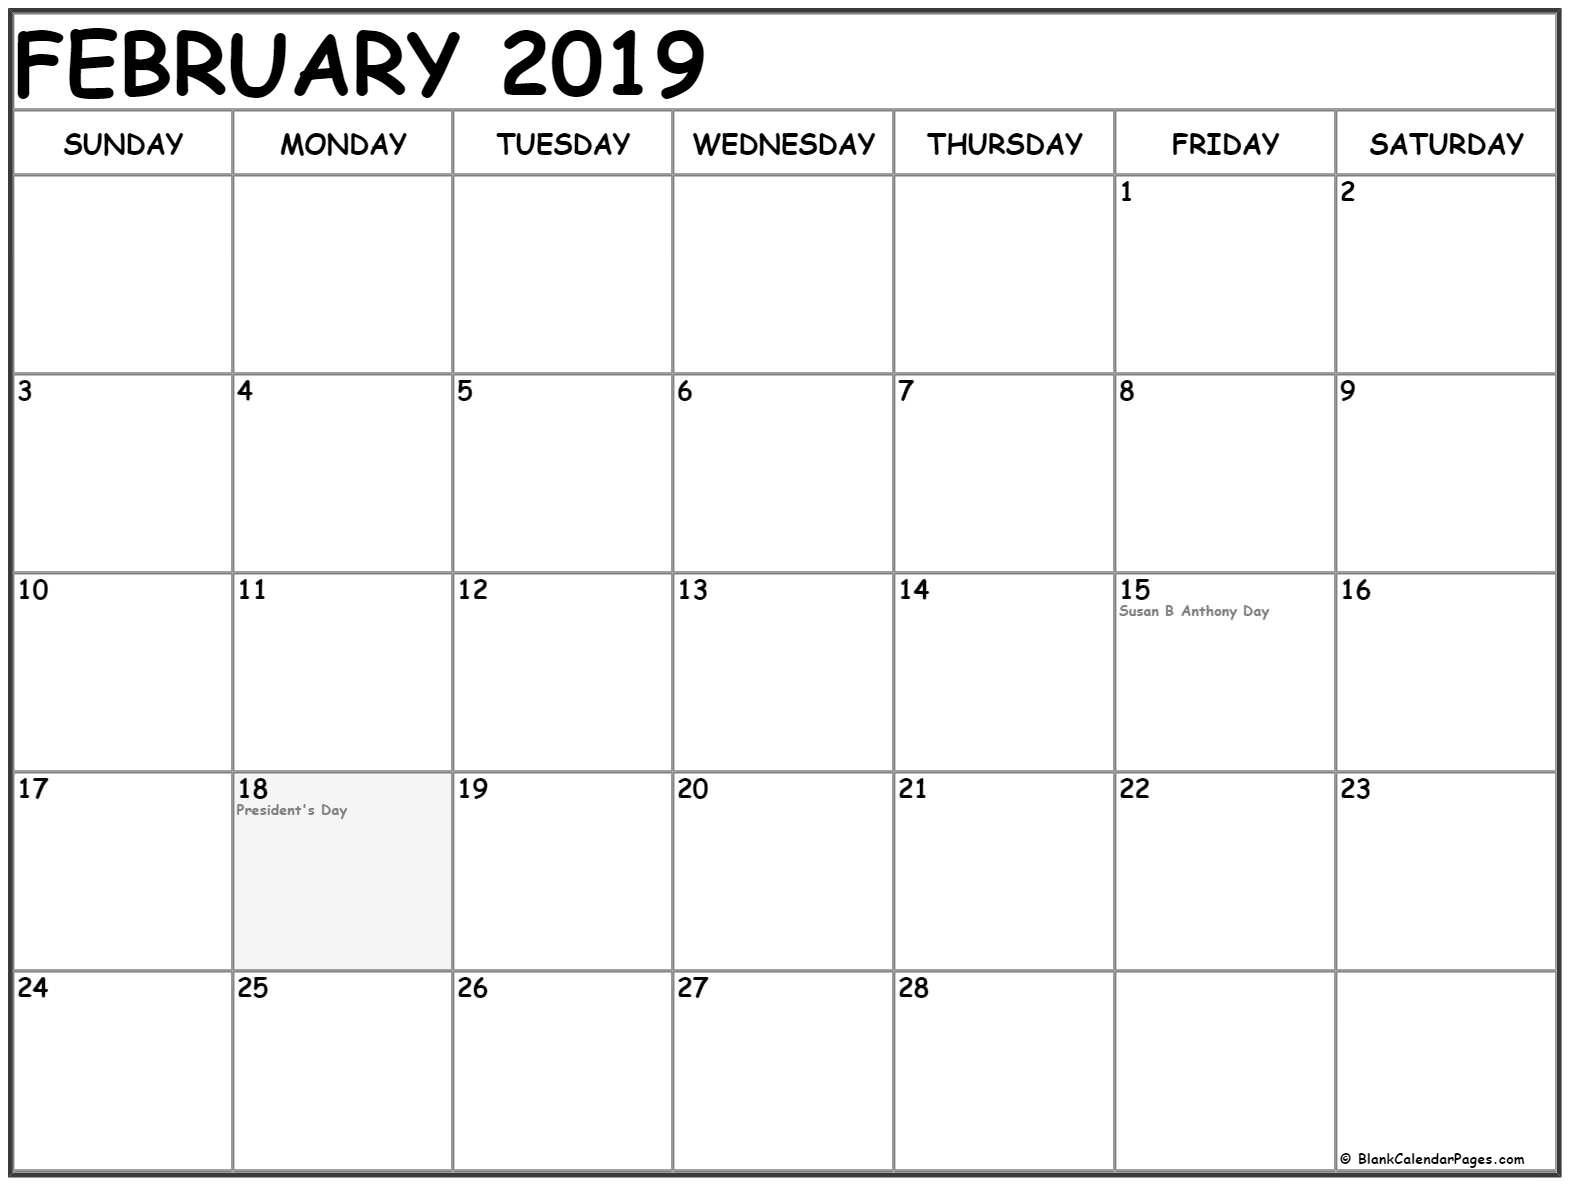 Collection Of February 2019 Calendars With Holidays Calendar Holidays In February